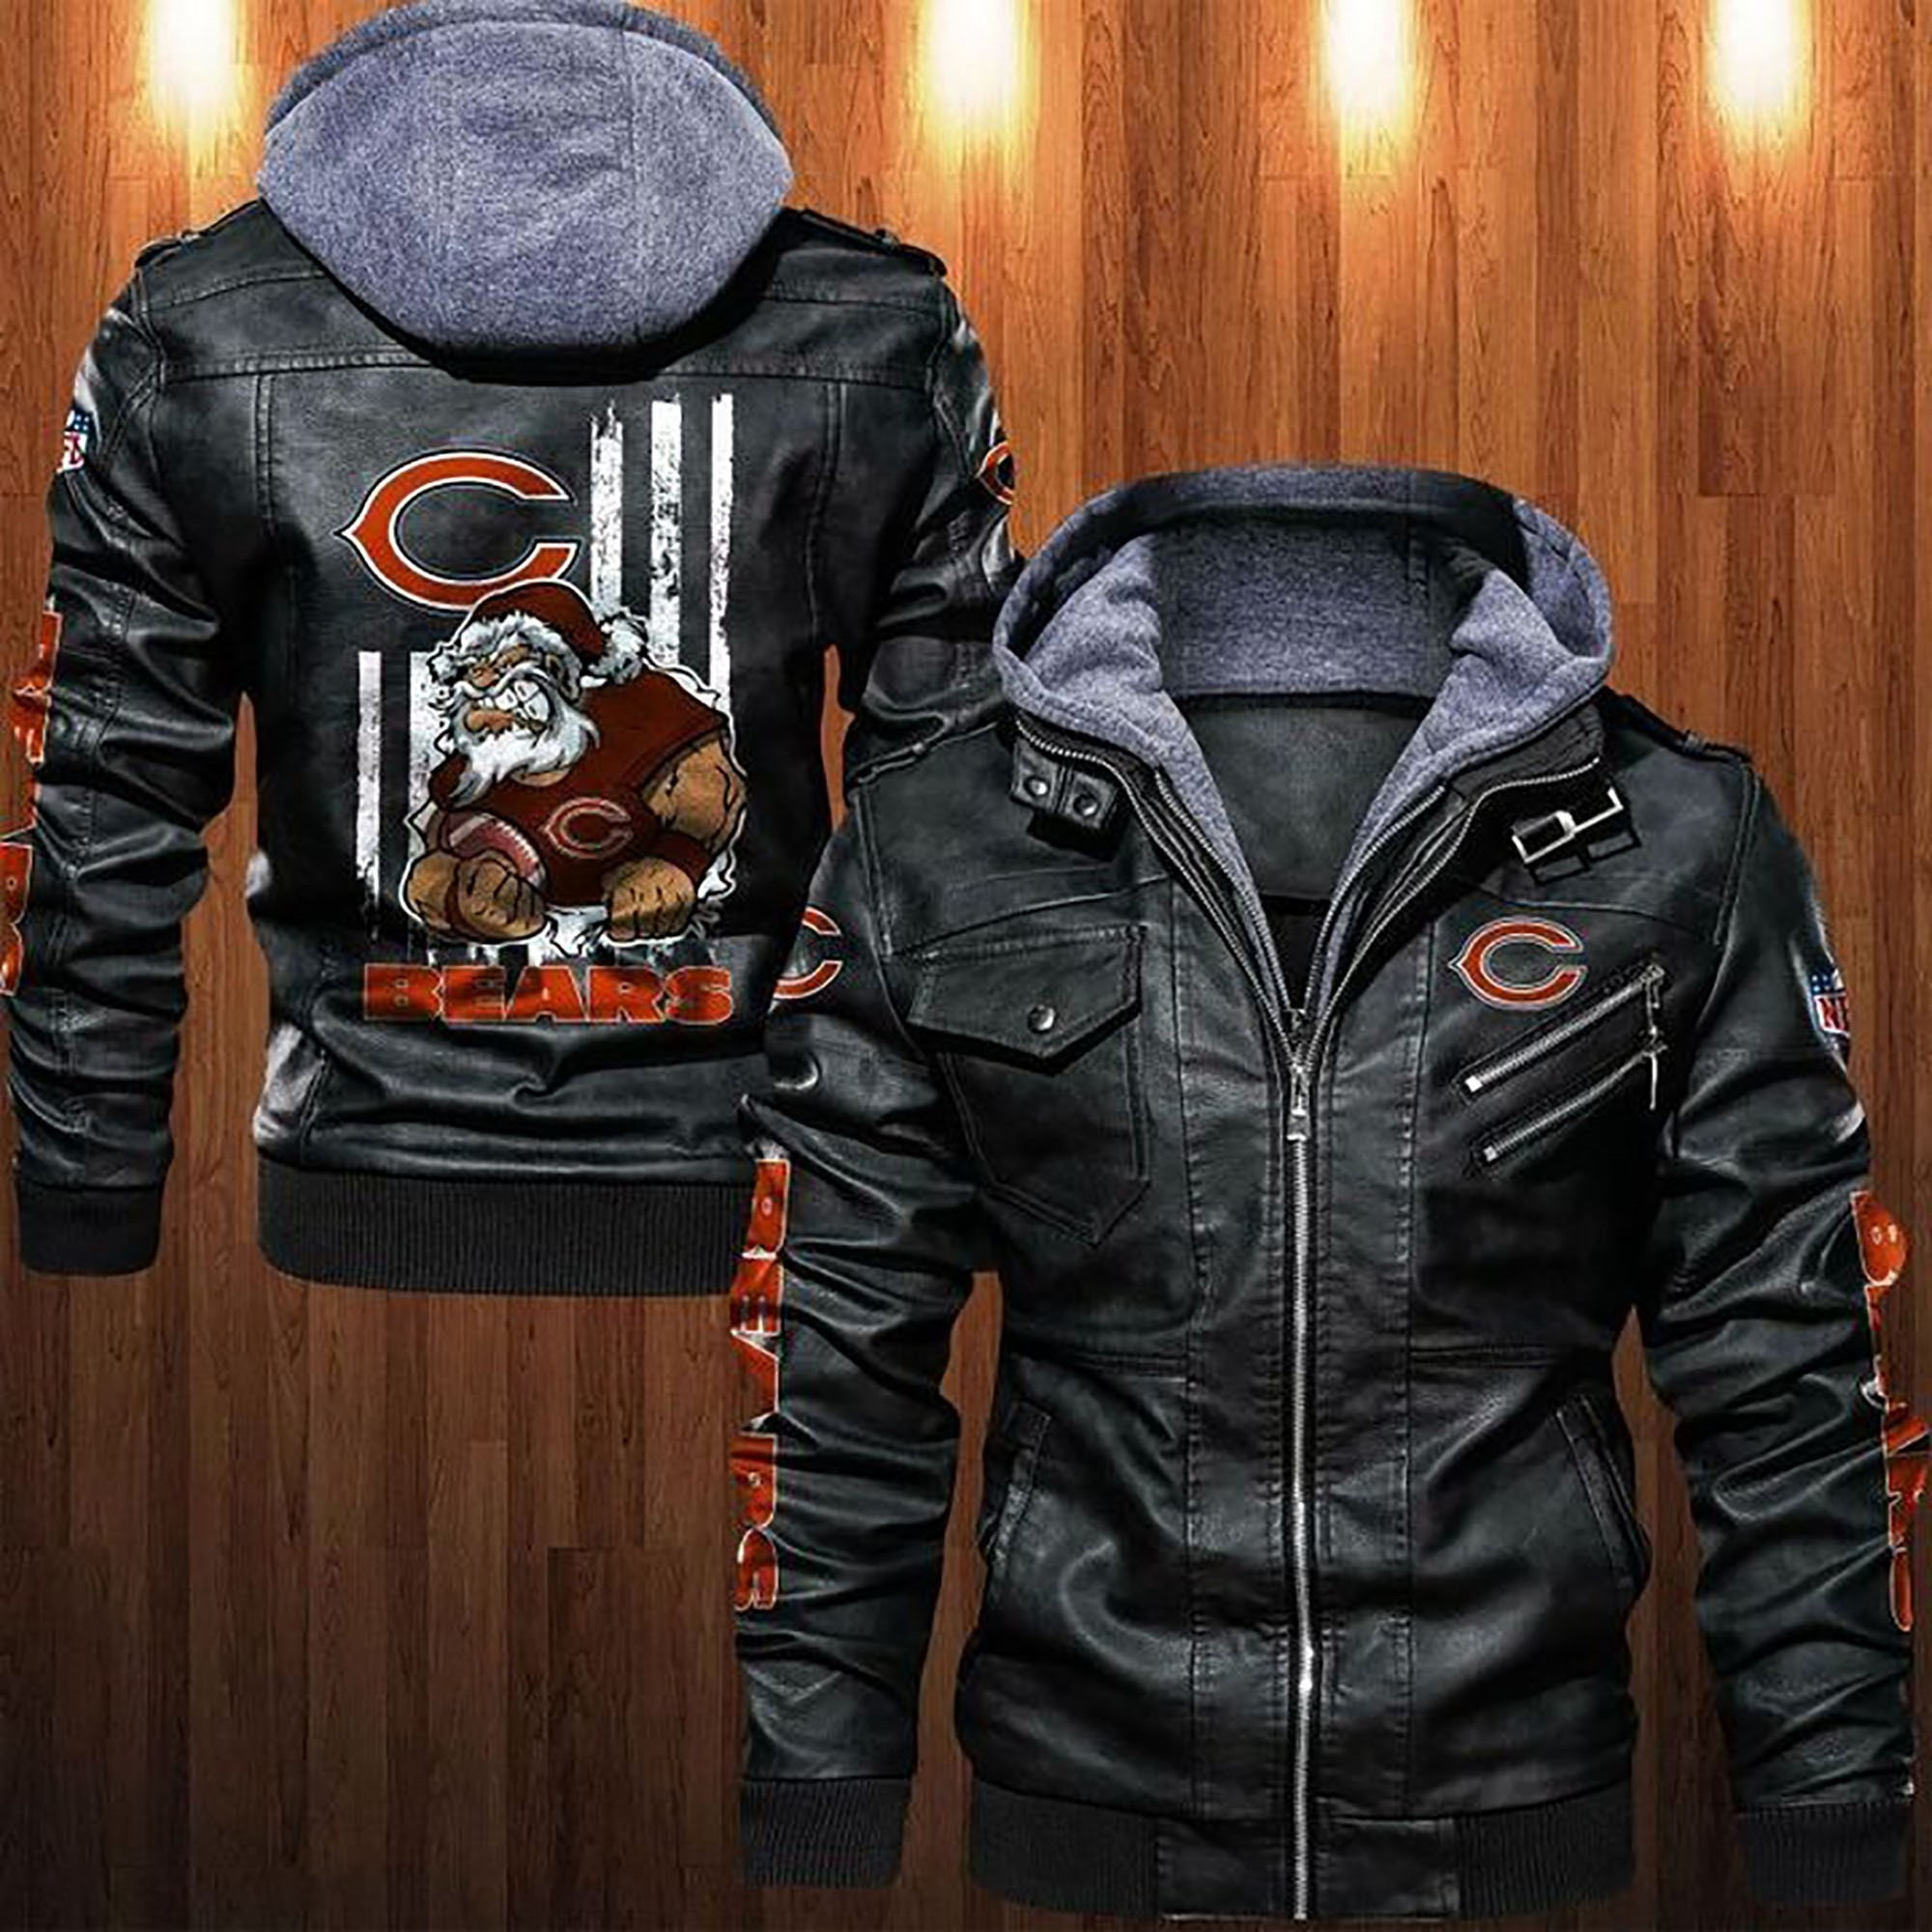 These Amazing Leather Jacket will add to the appeal of your outfit 85